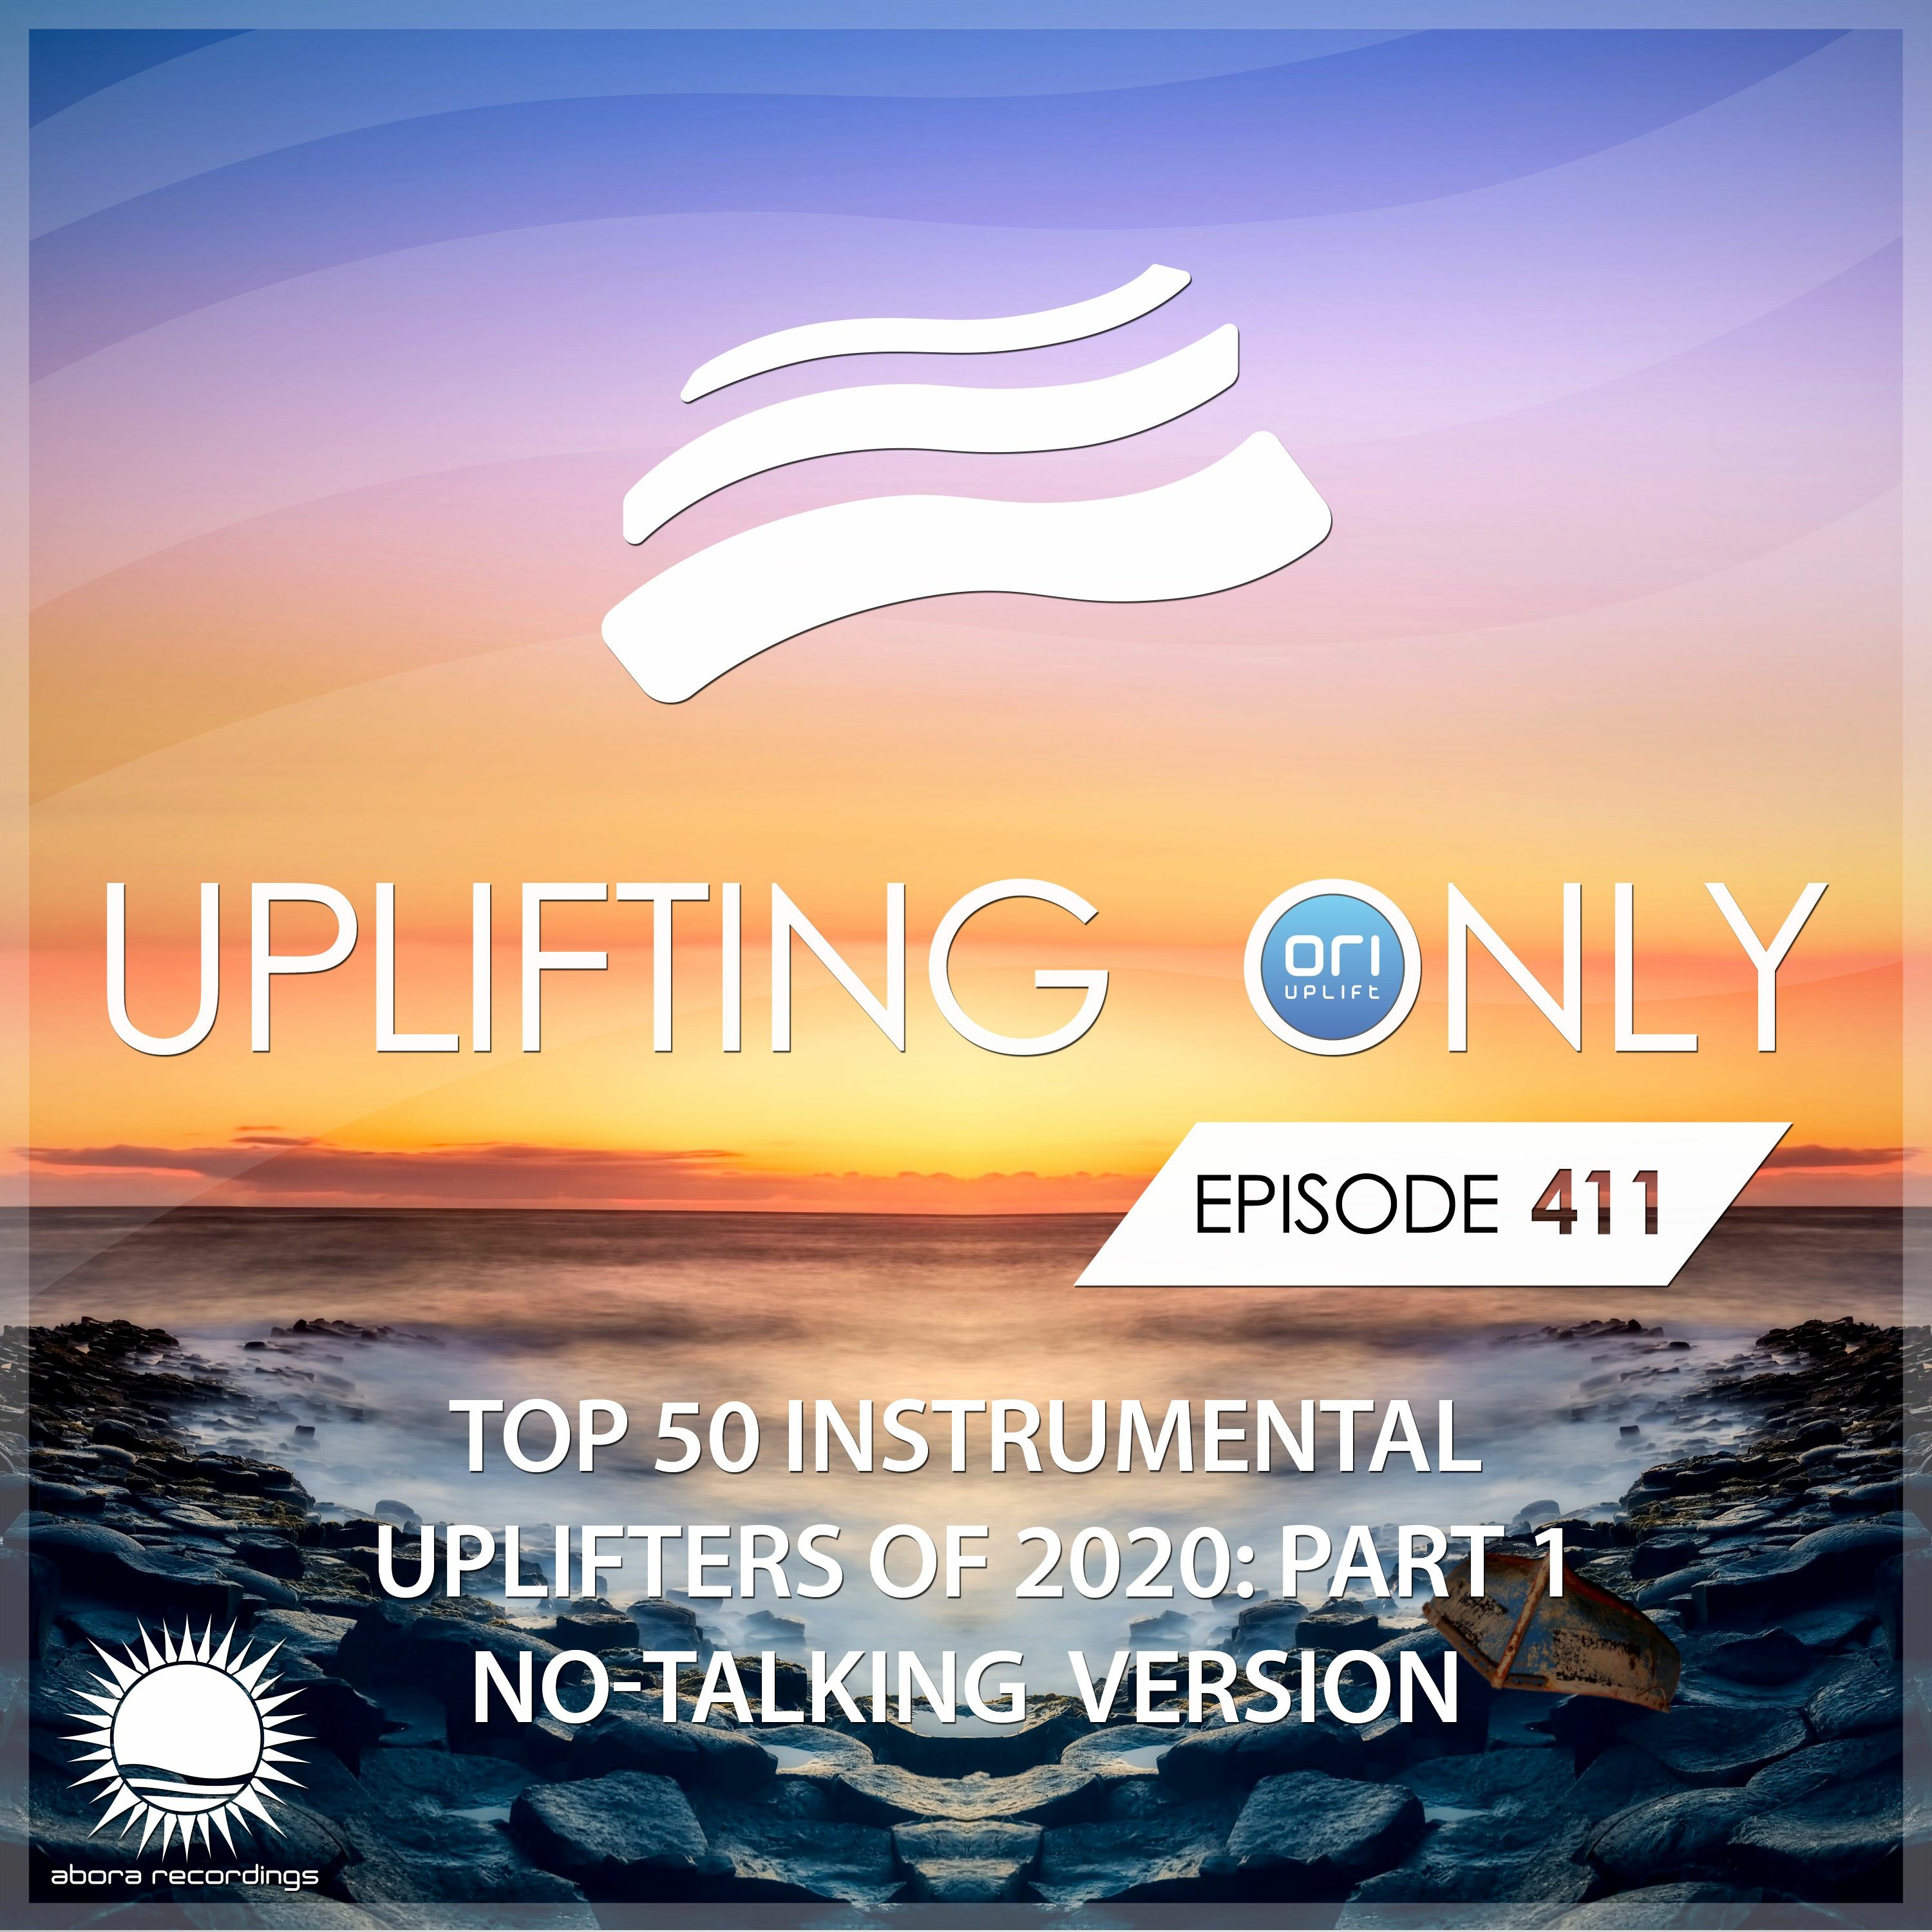 Uplifting Only 411 [No Talking] (Ori's Top 50 Instrumental Uplifters of 2020 - Part 1) (2020-12-24)